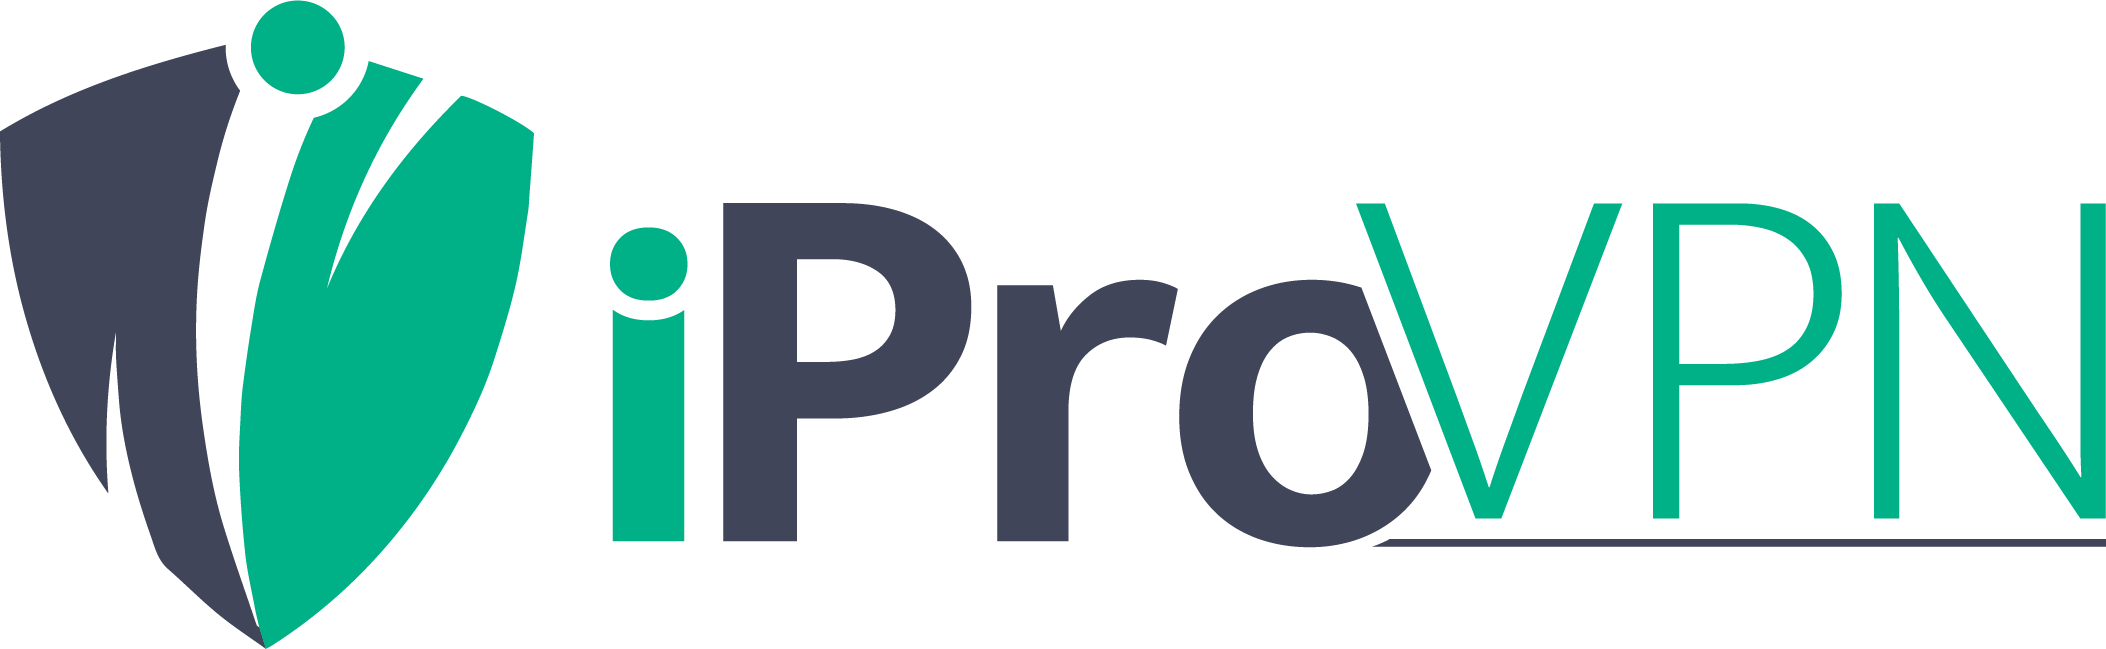 The official iprovpn logo